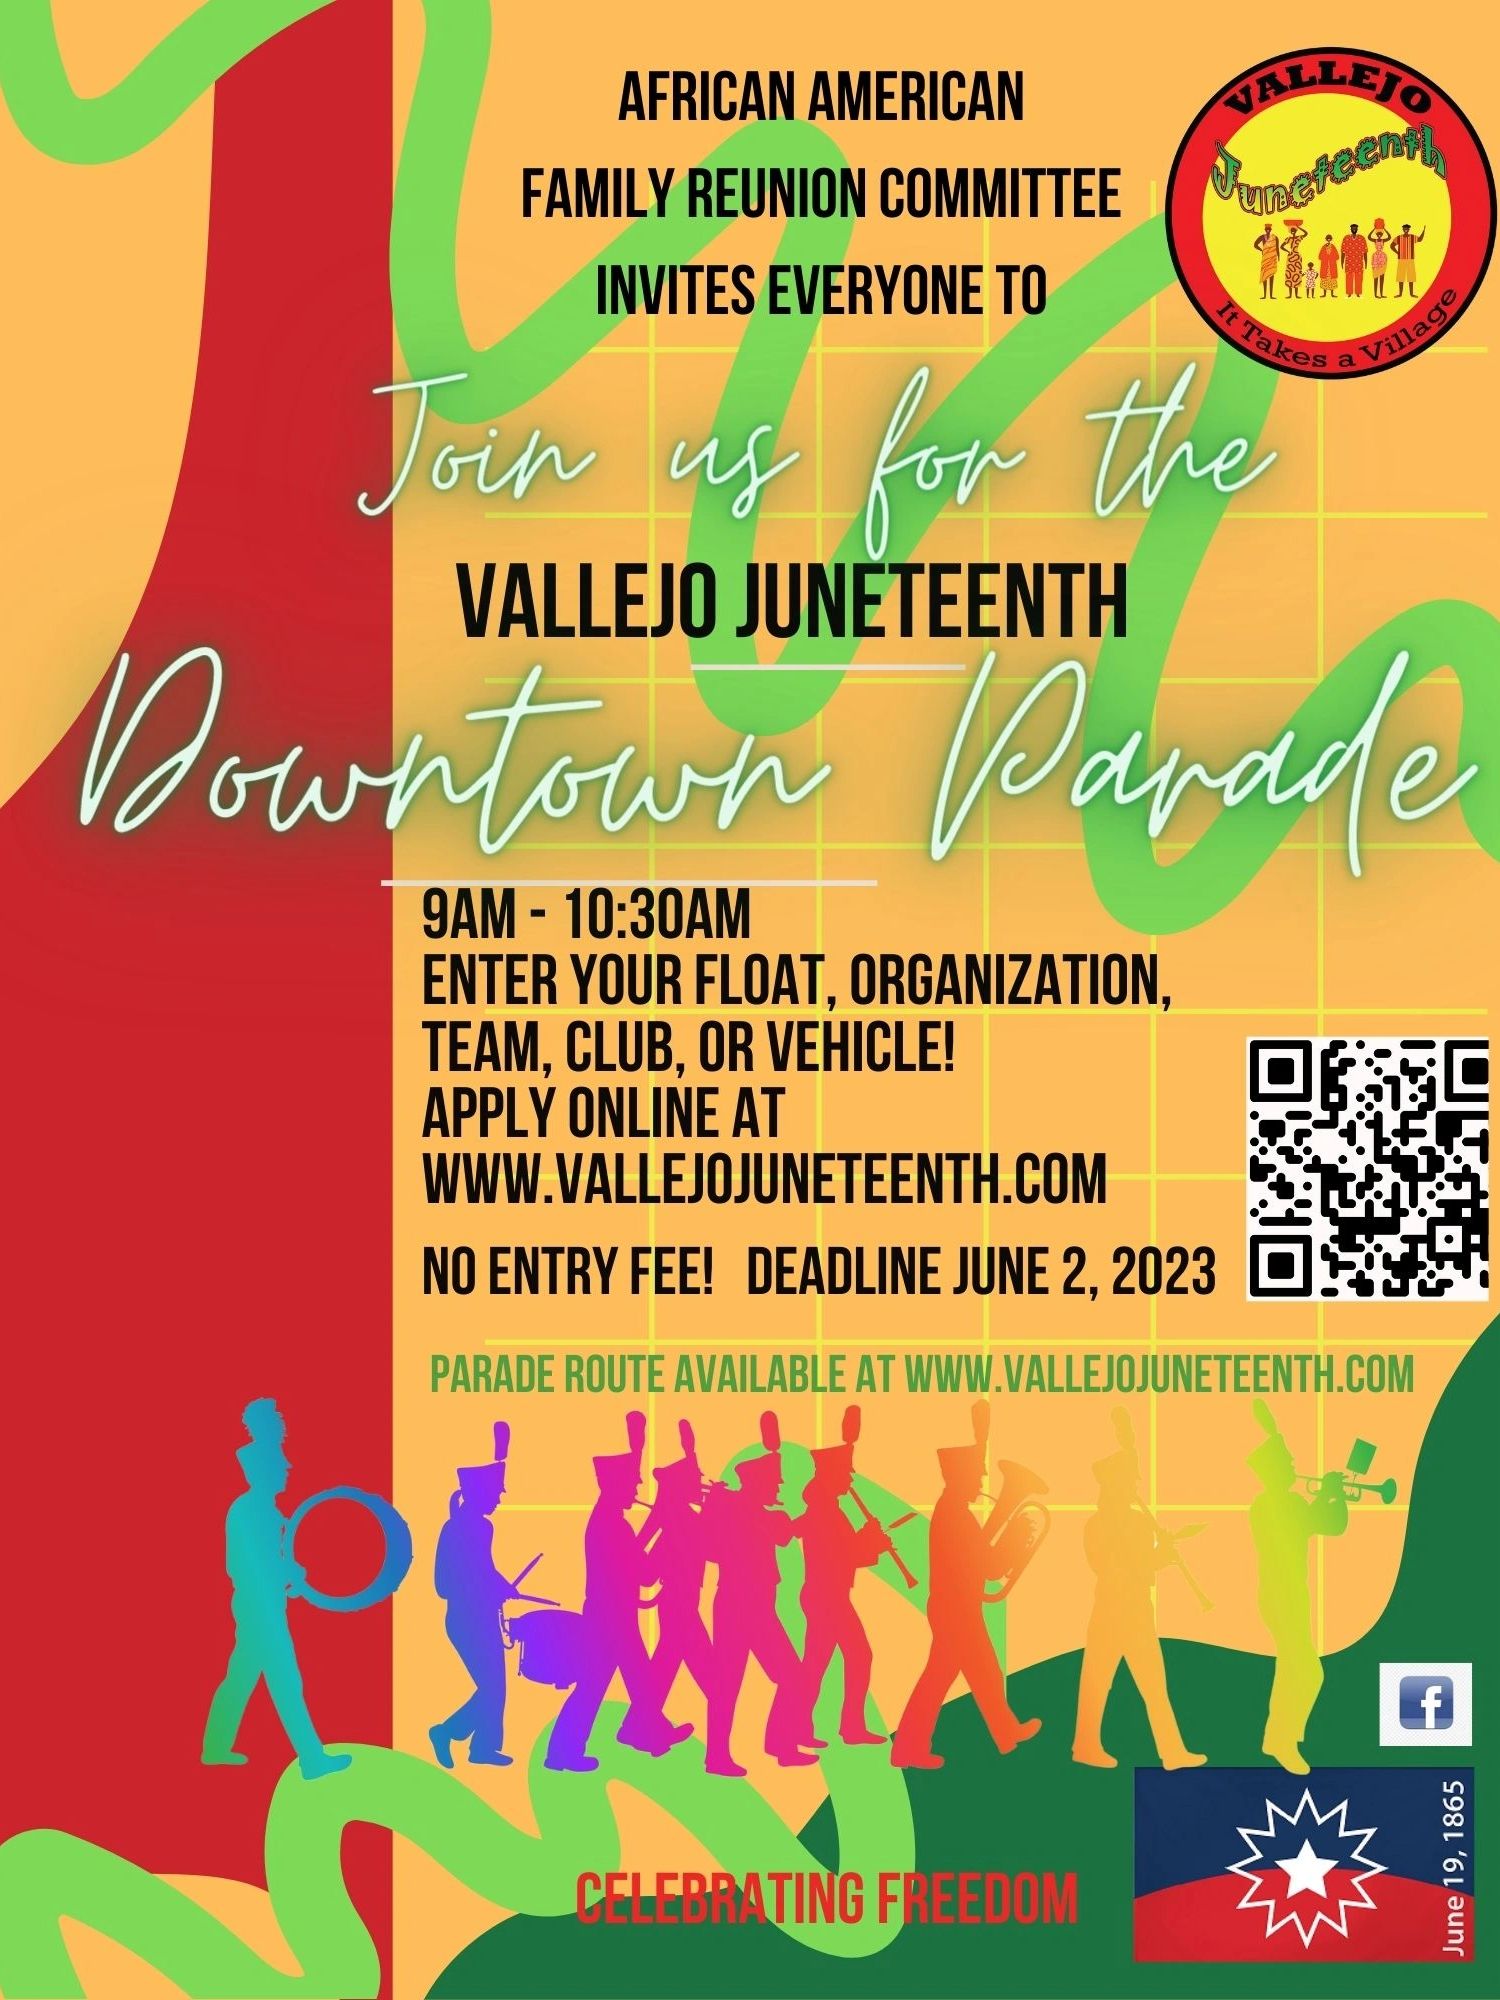 An image of the Juneteenth Parade flyer